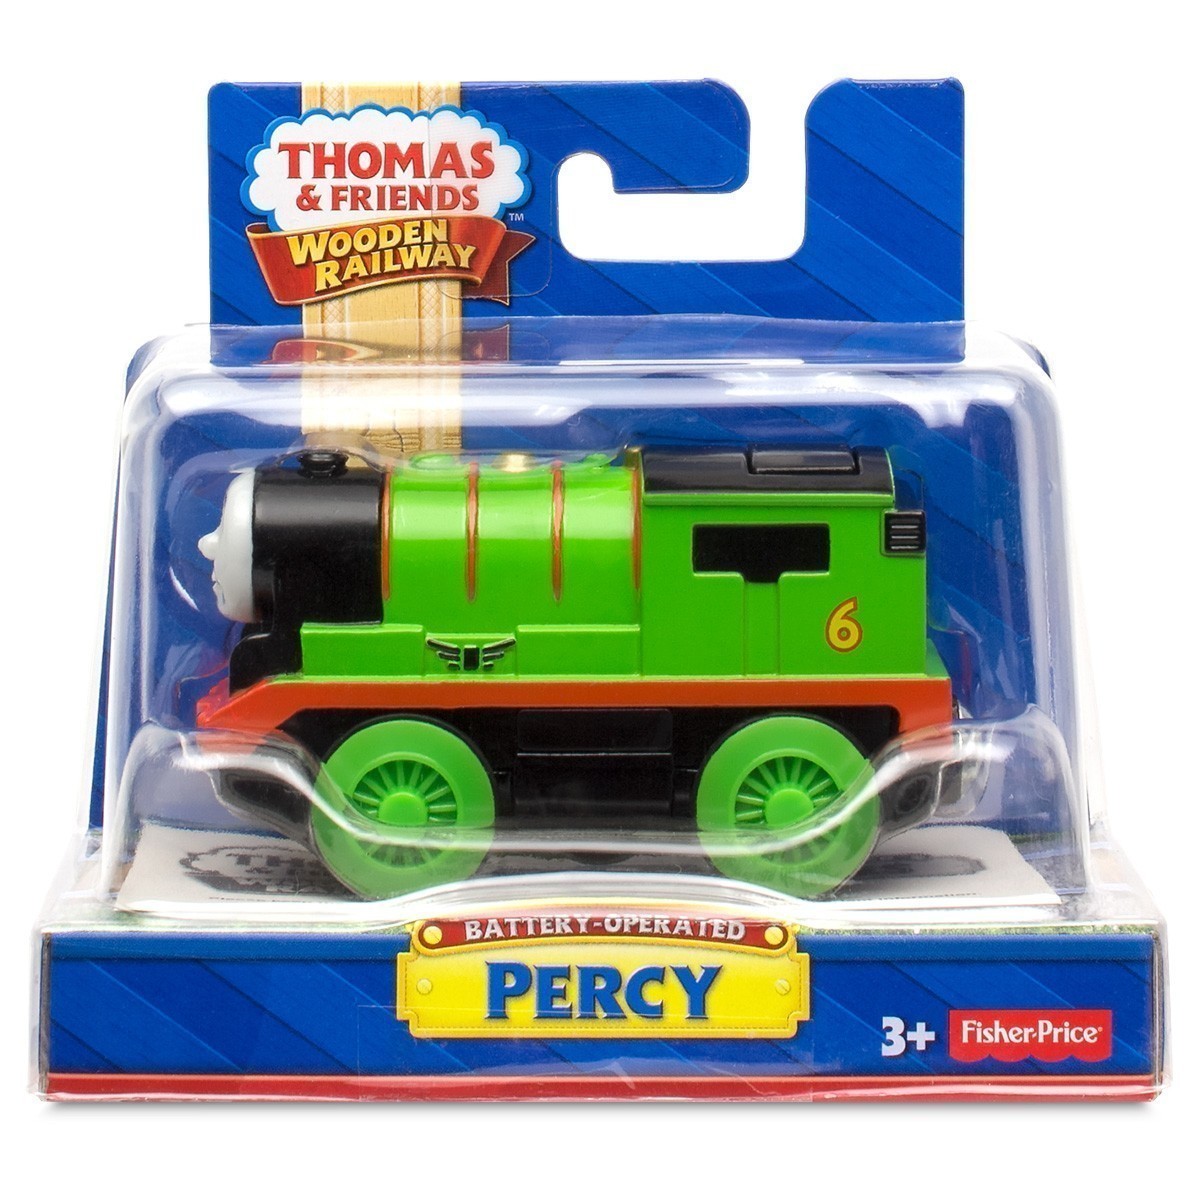 Thomas & Friends - Wooden Railway - Battery Operated Percy